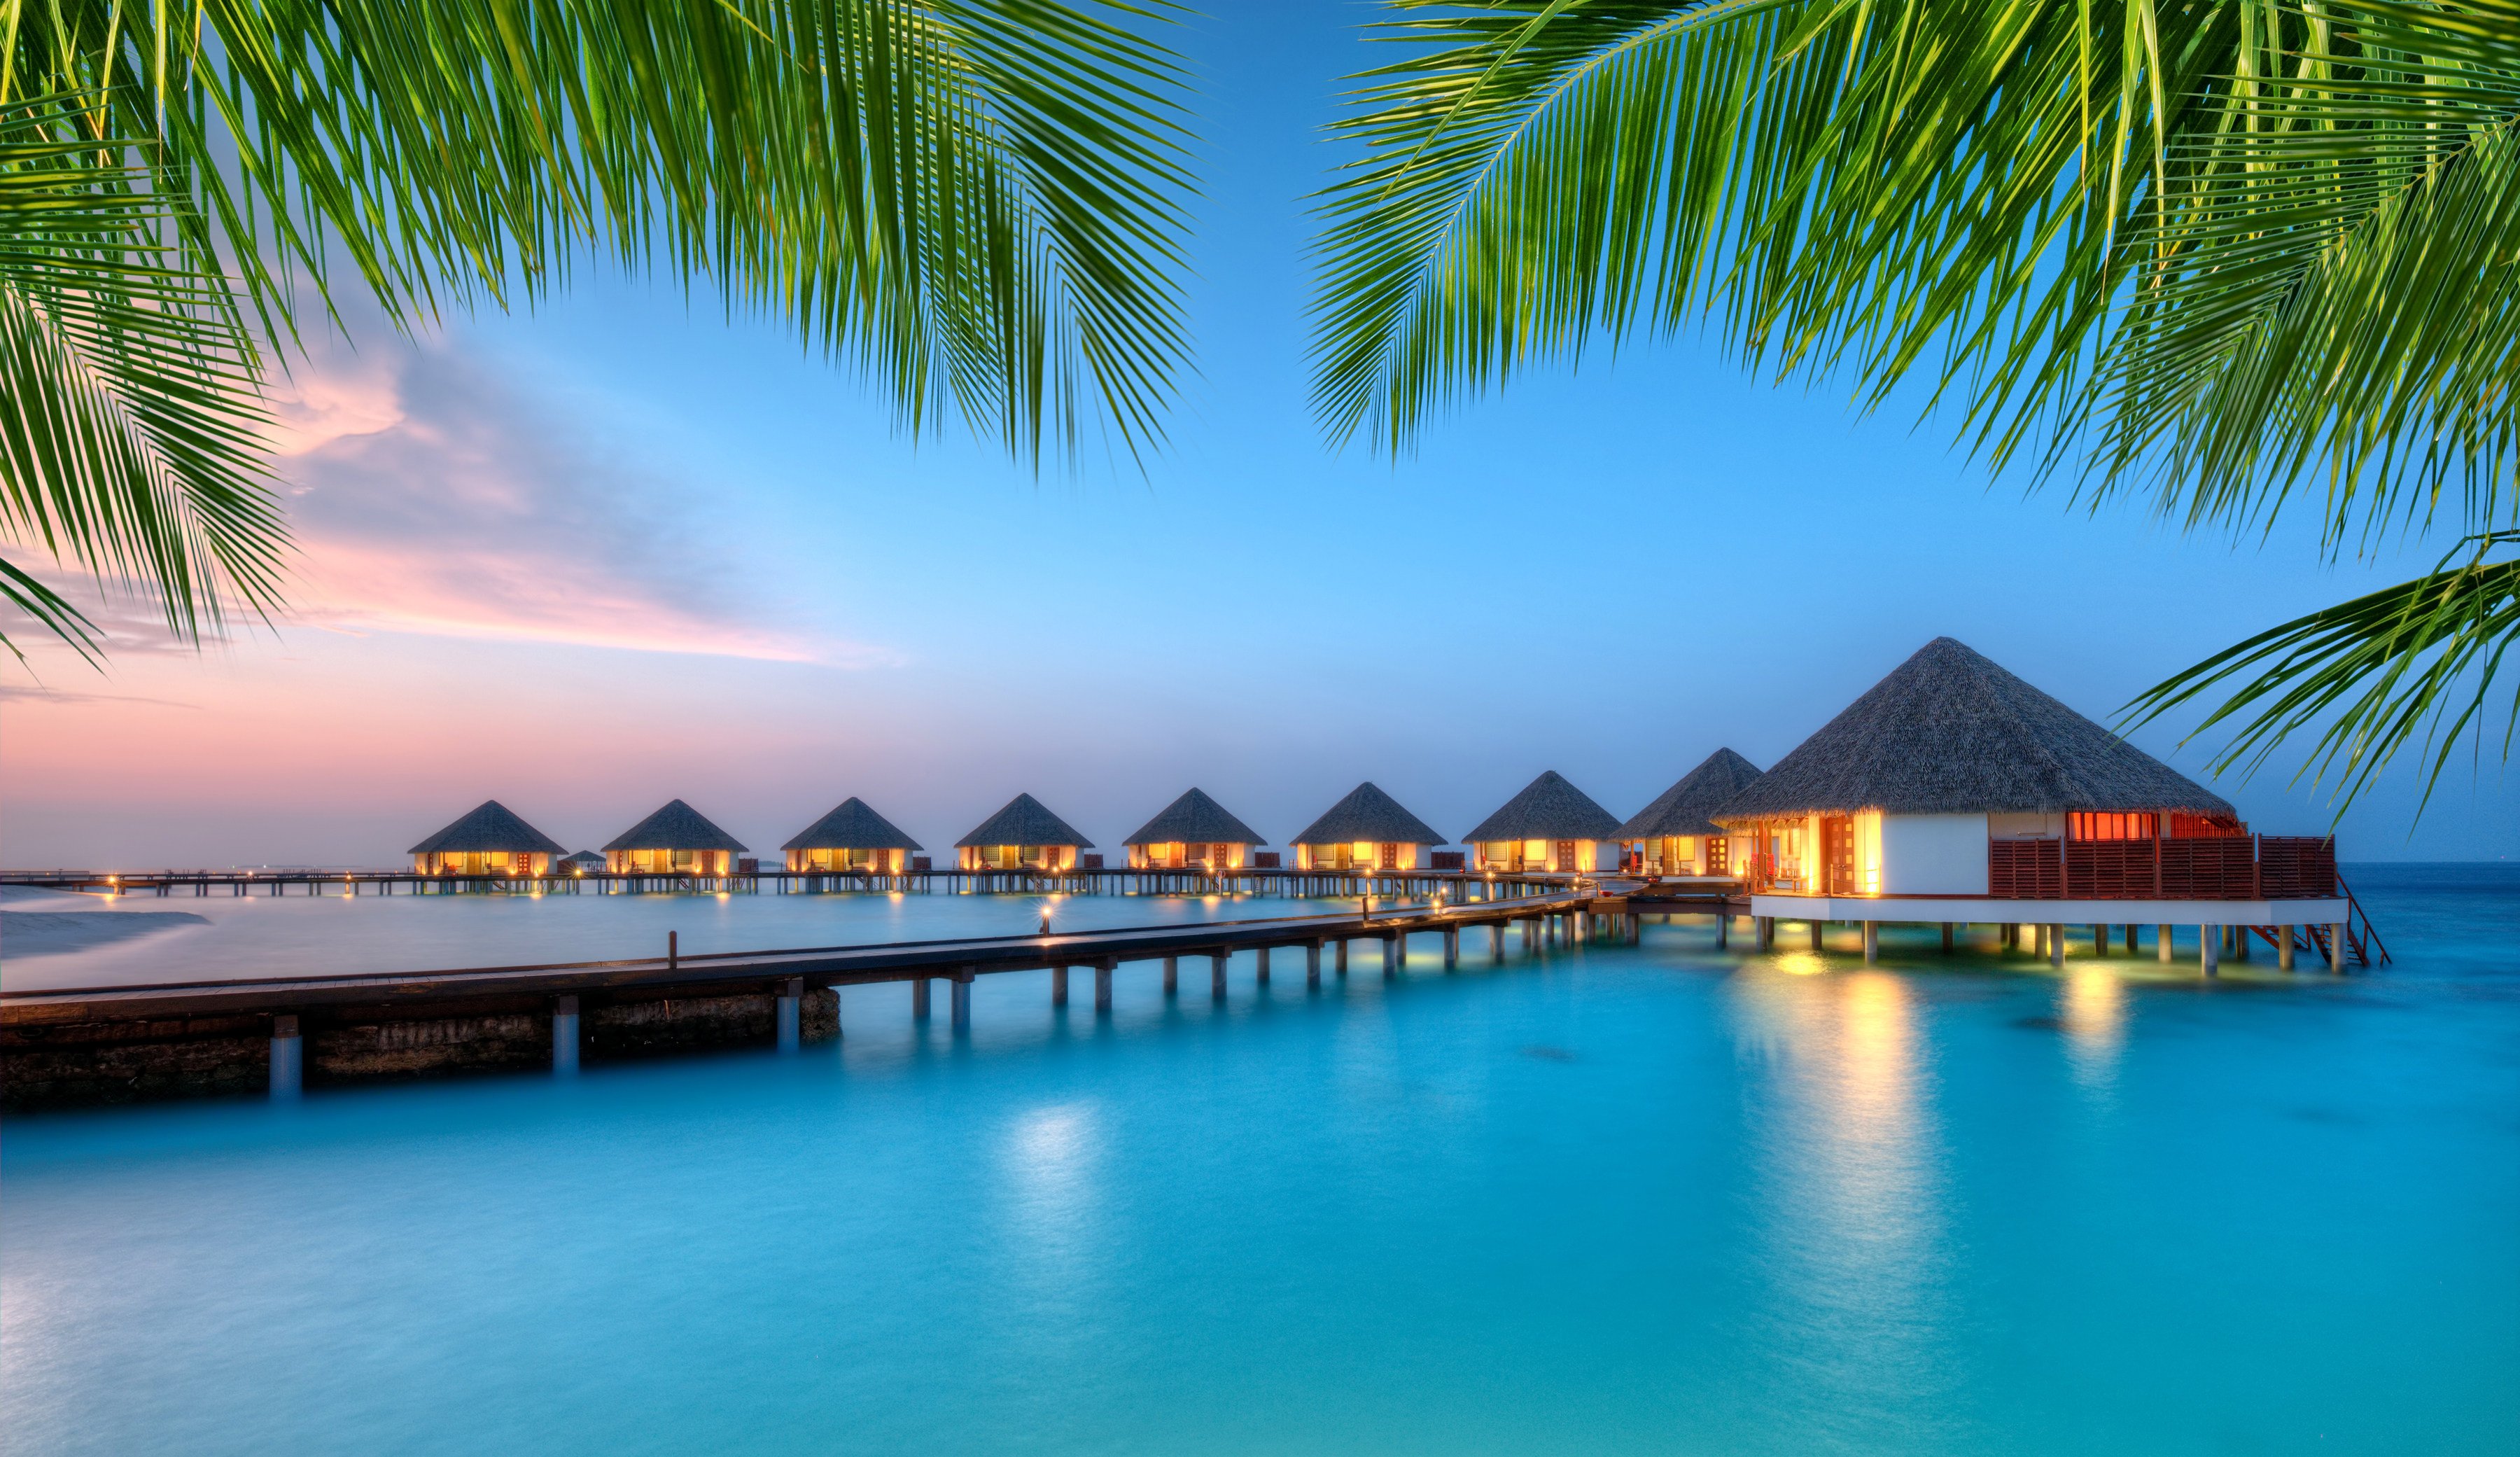 The Maldives, a tiny Islamic republic of more than 1,000 strategically located coral islets, is known for its secluded sandy white beaches and shallow turquoise lagoons. Photo: Shutterstock